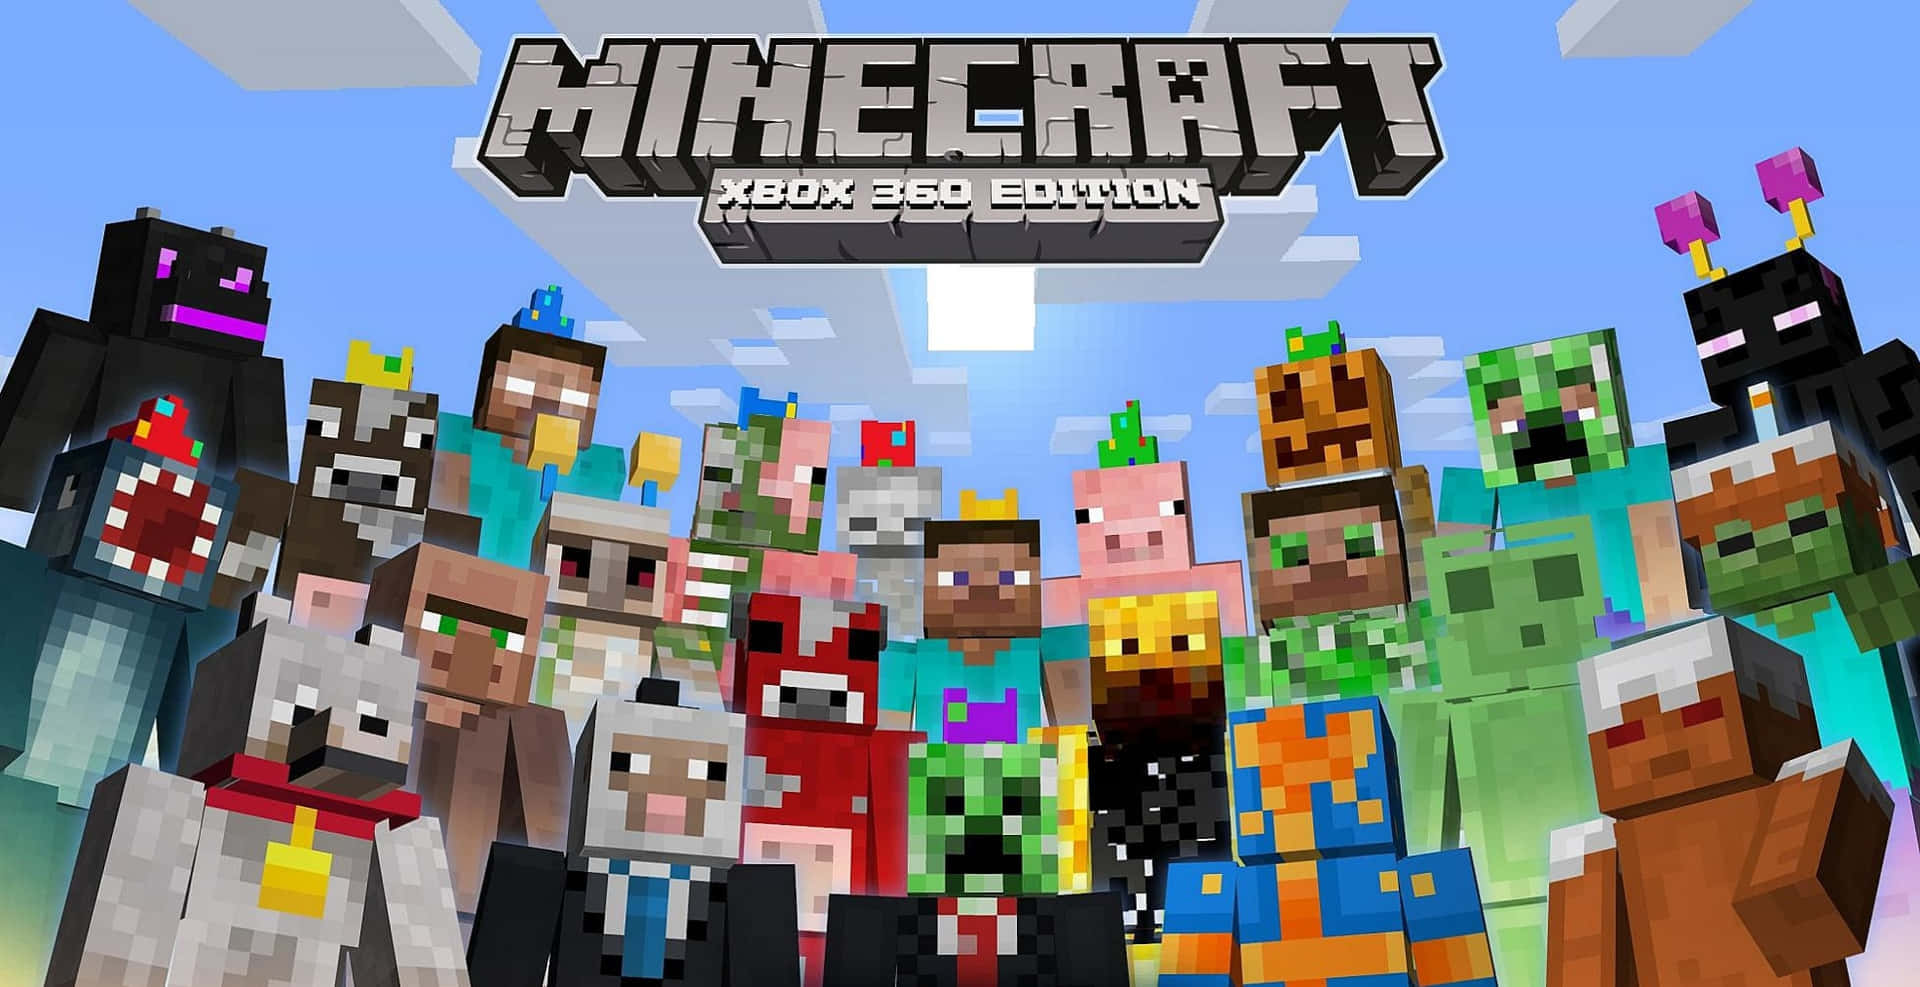 “Experience Thrilling Adventures In the Minecraft World”